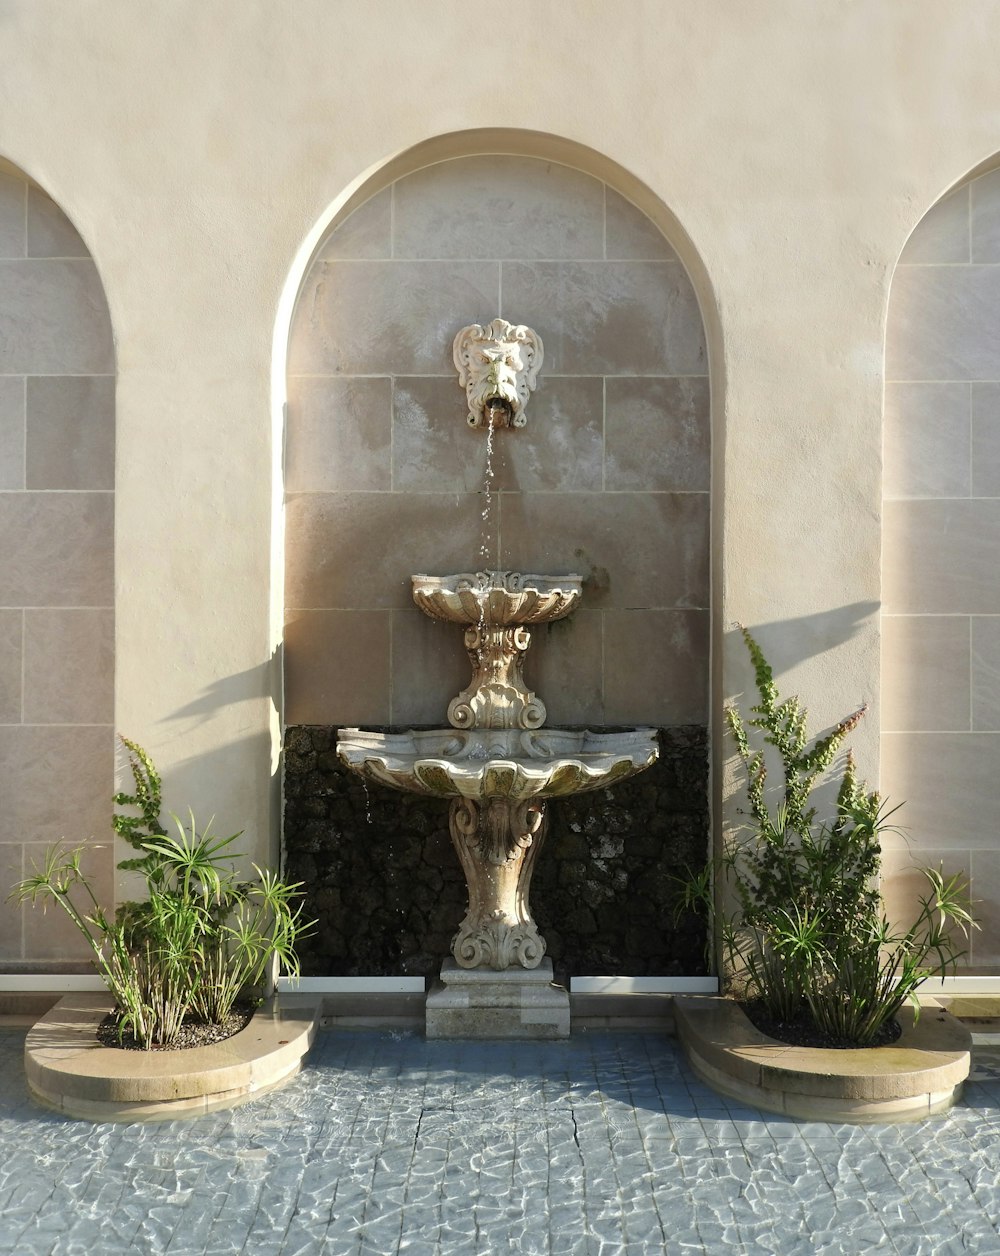 a fountain in a courtyard surrounded by arches